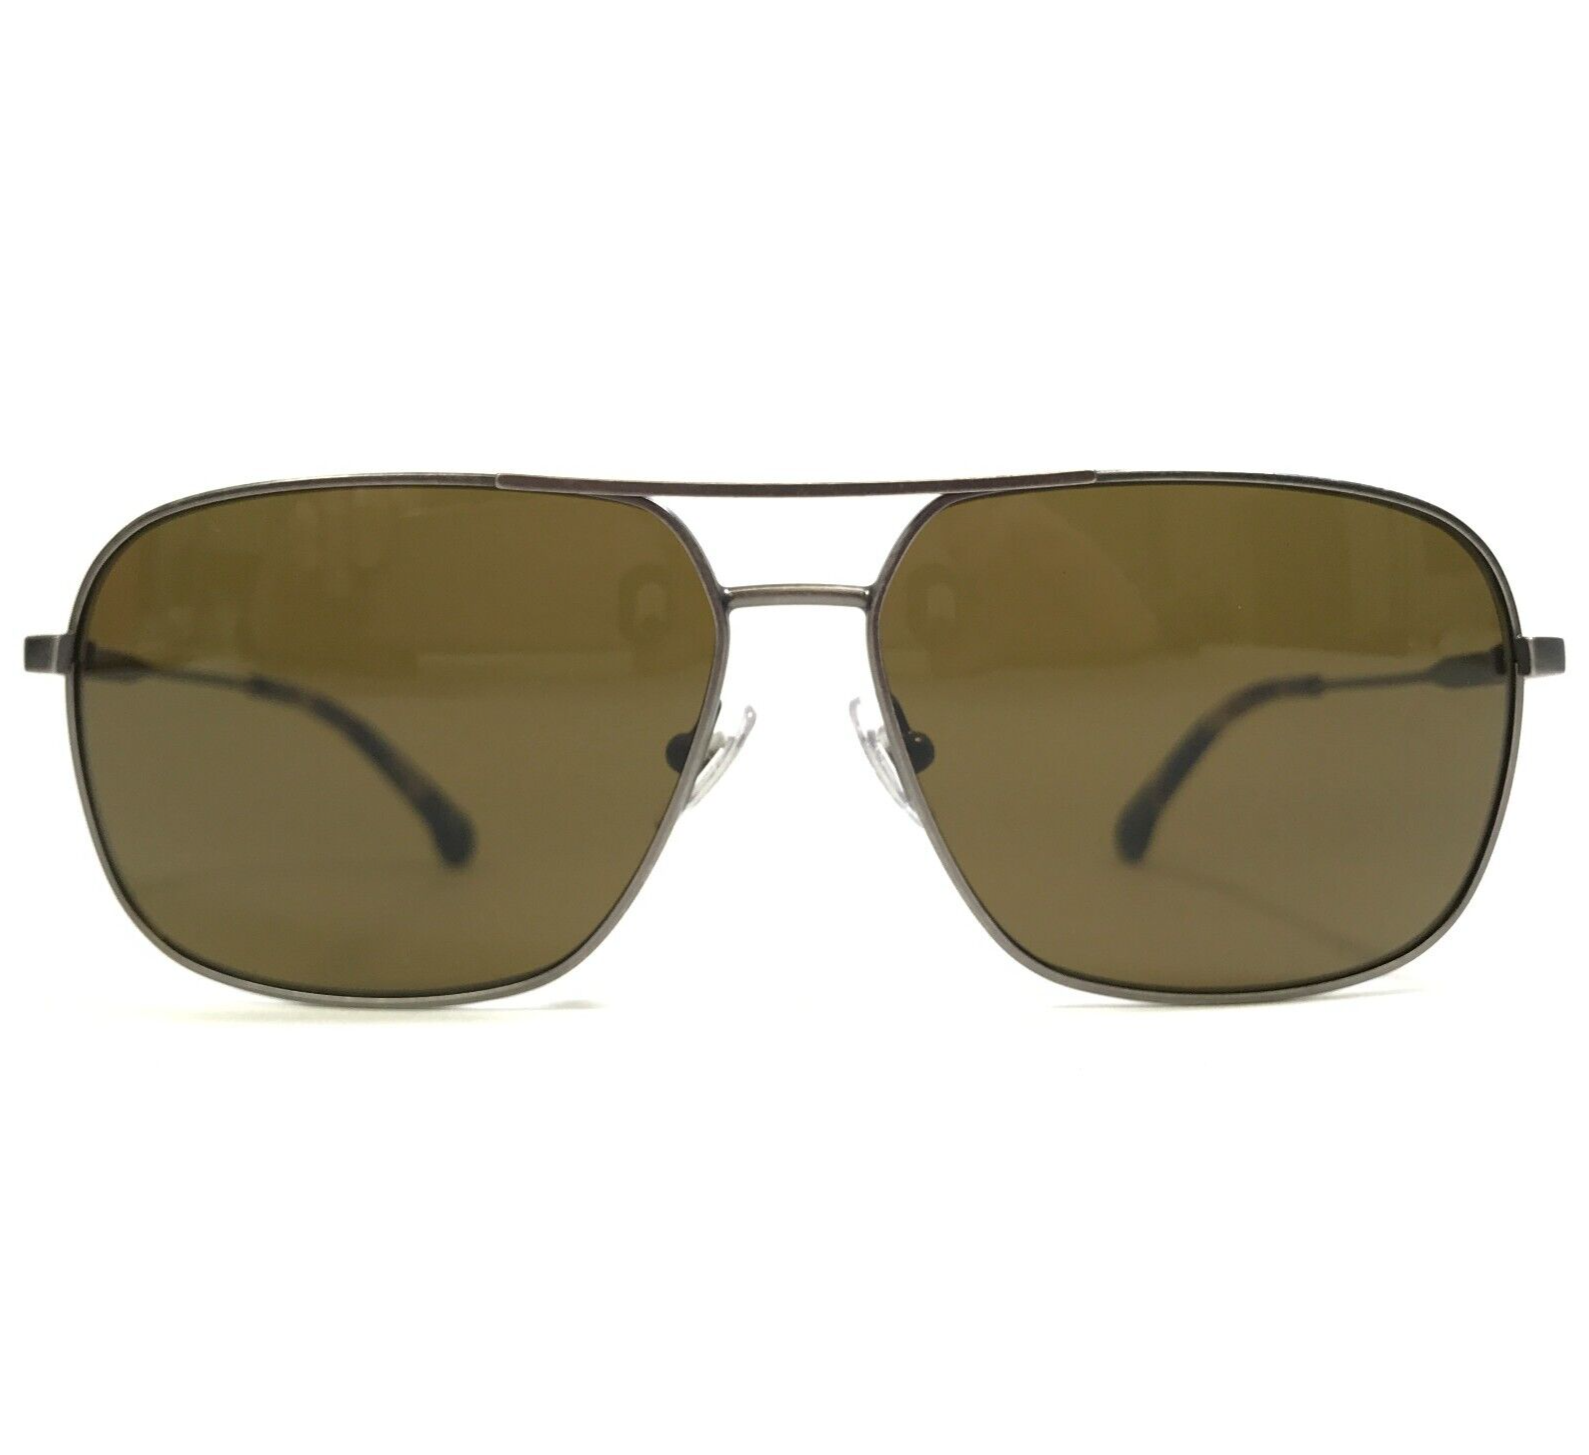 Primary image for Brooks Brothers Sunglasses BB4030S 151573 Gray Square Frames with Brown Lenses